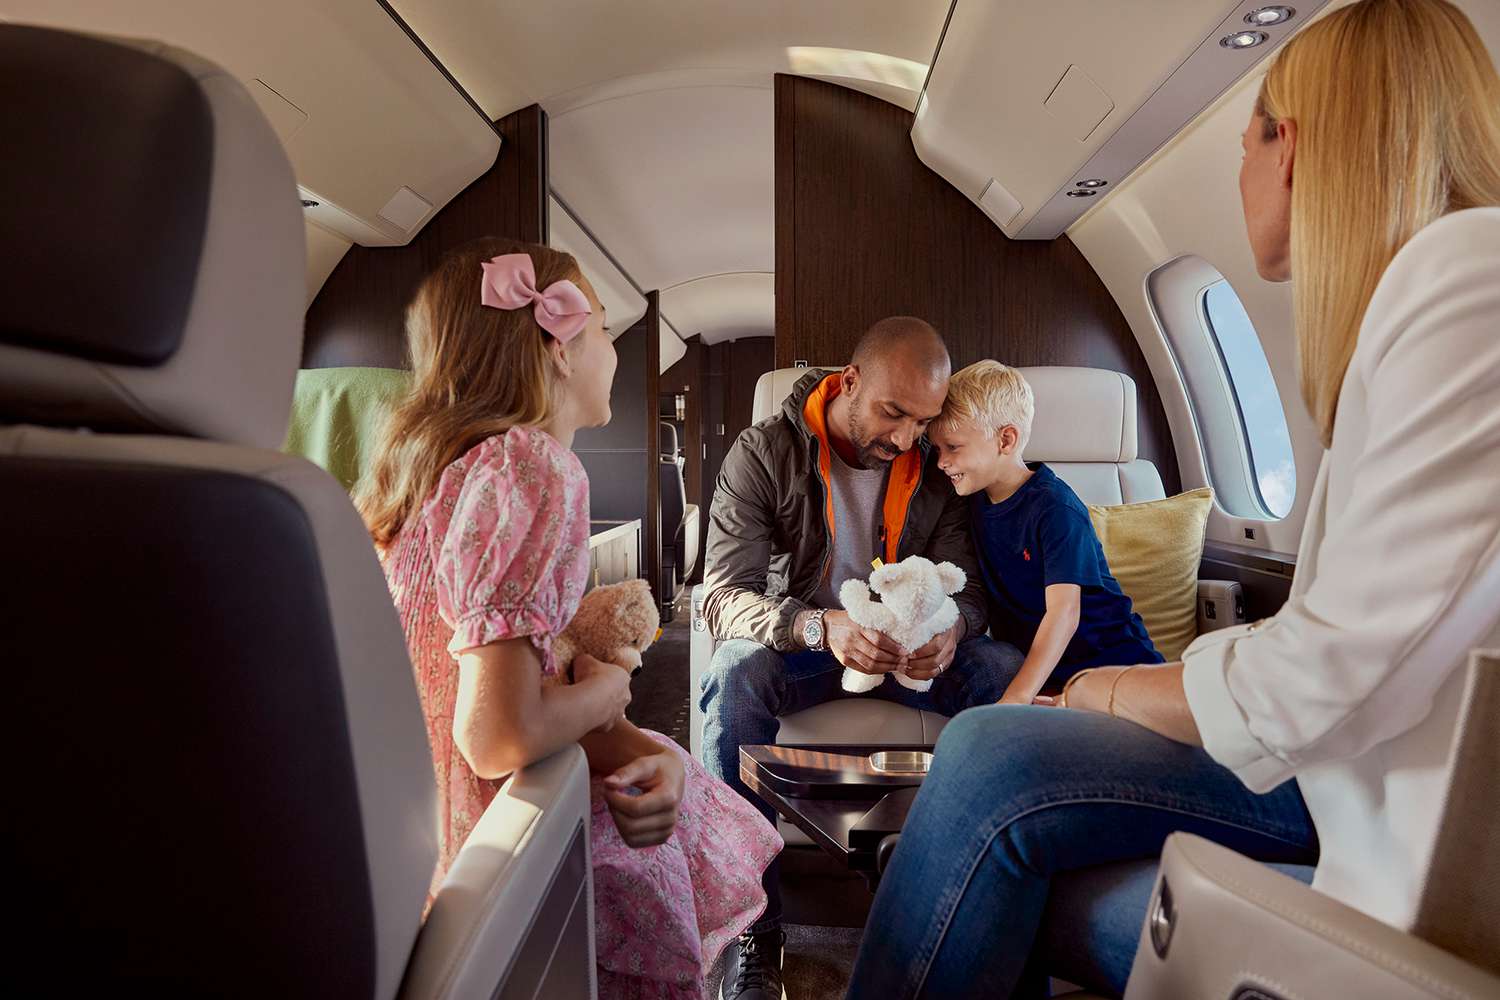 Family And Friends Vacations Leisure And Bonding On A Private Jet In The UAE